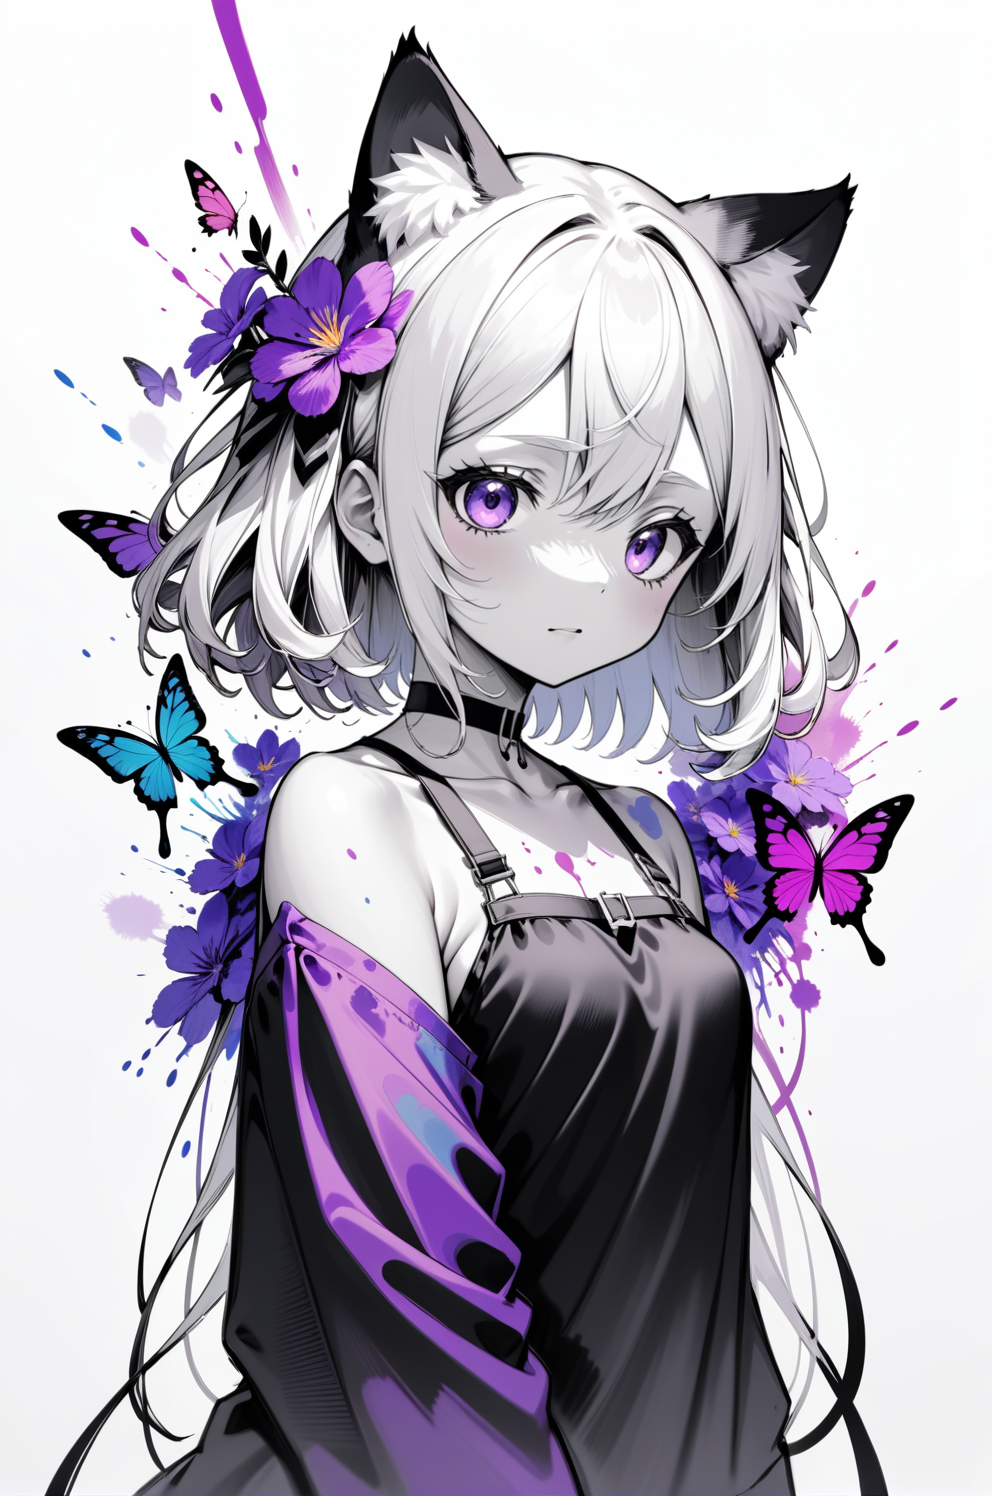 p best quality,master,masterpiece,//(fusion of limited color,Maximalism artstyle,Geometric artstyle,Butterflies),double ex...